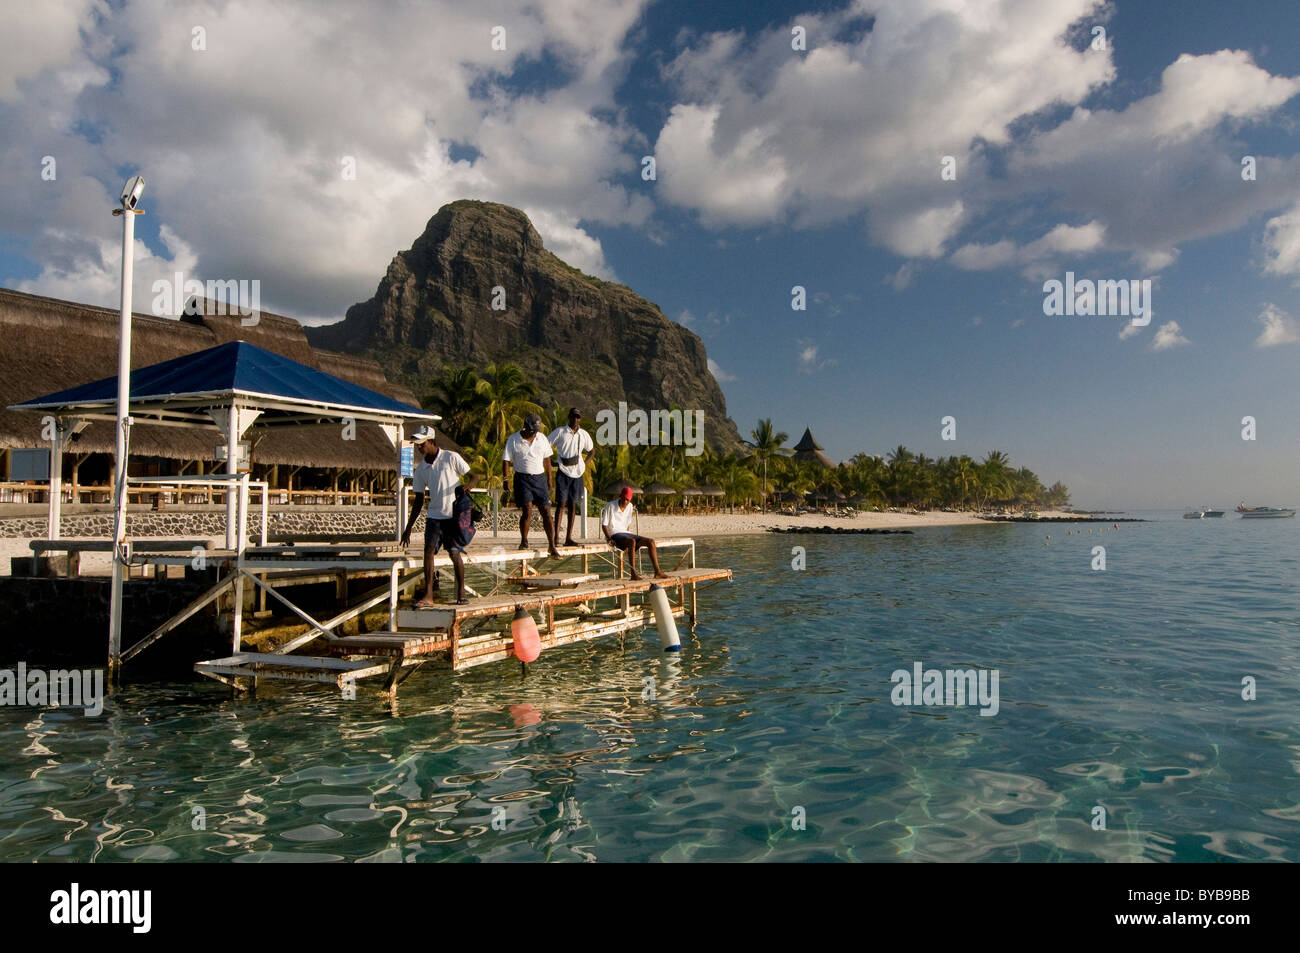 Local people at pier, Le Paradis Hotel, Mauritius, Africa Stock Photo